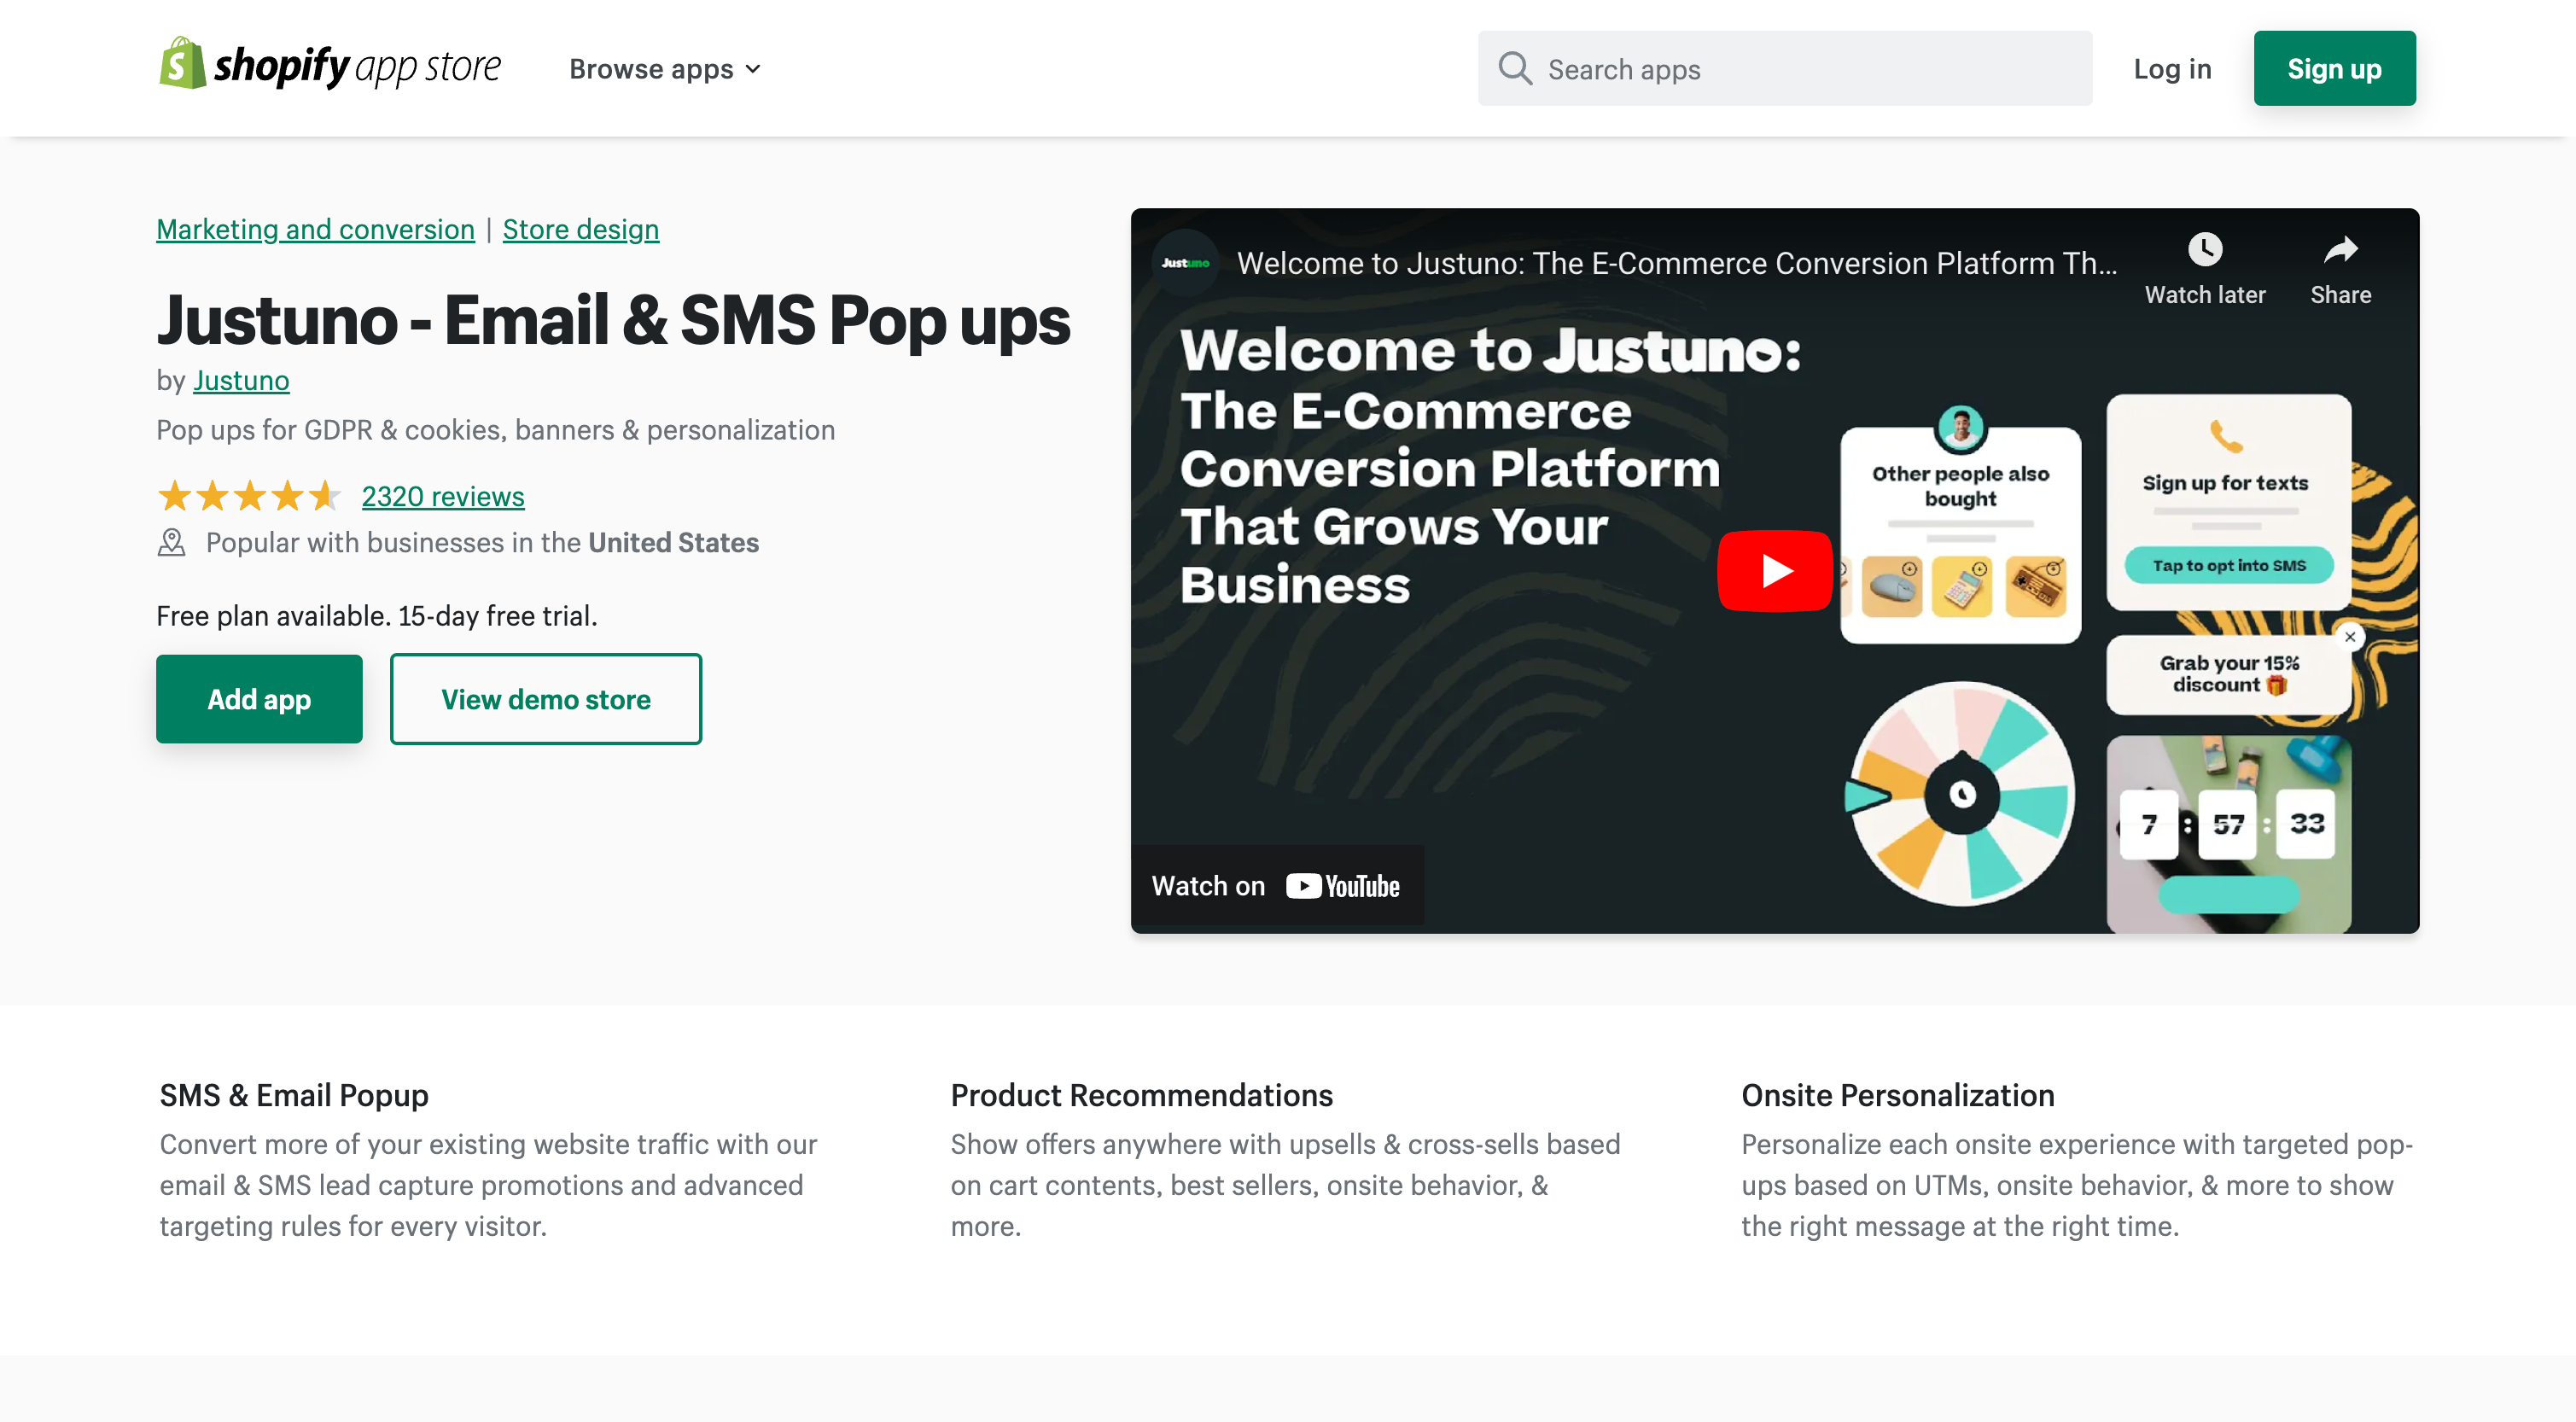 Justuno ‑ Email & SMS Pop ups - Pop ups for GDPR & cookies, banners & personalization | Shopify App Store